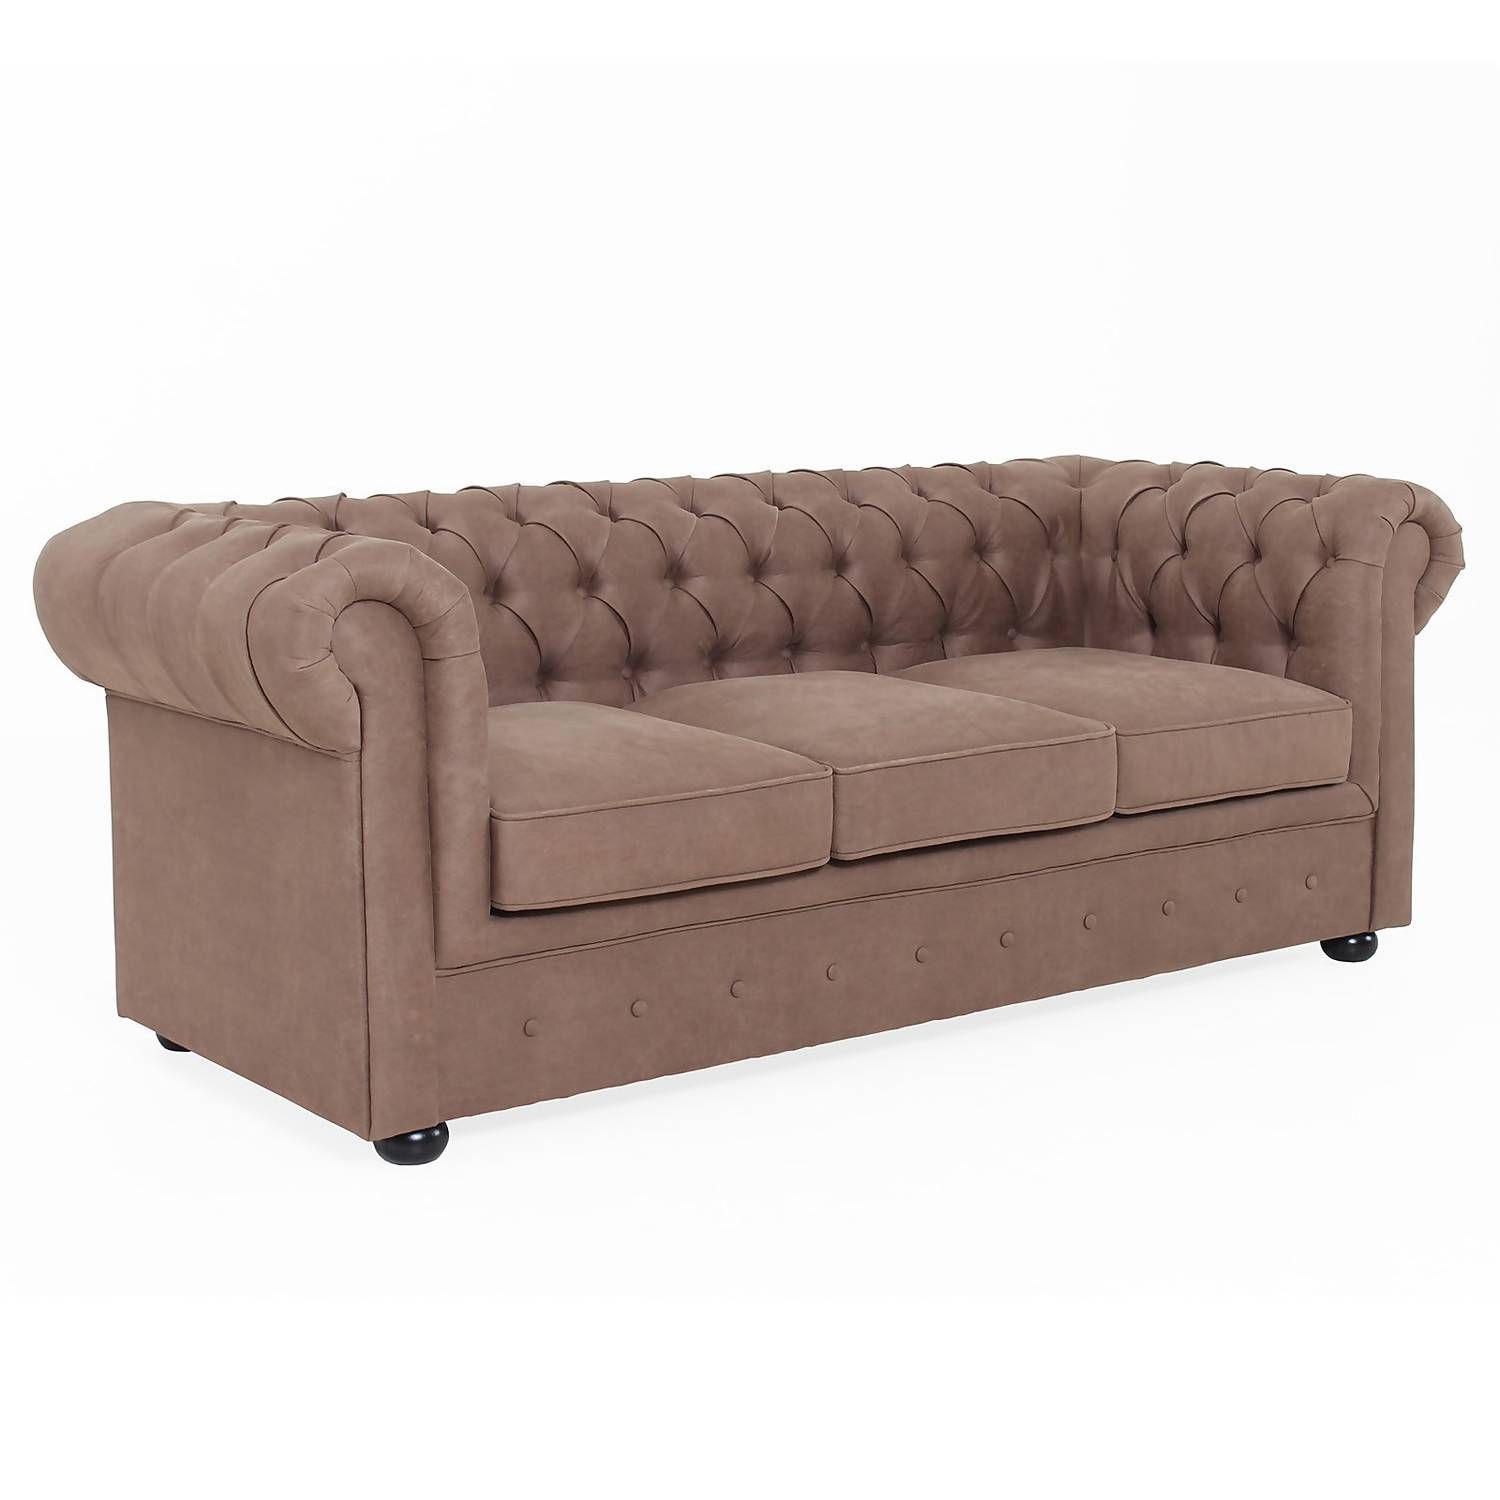 Chesterfield Faux Leather 3 Seater Sofa – Tan | Homebase Regarding Traditional 3 Seater Faux Leather Sofas (View 13 of 15)